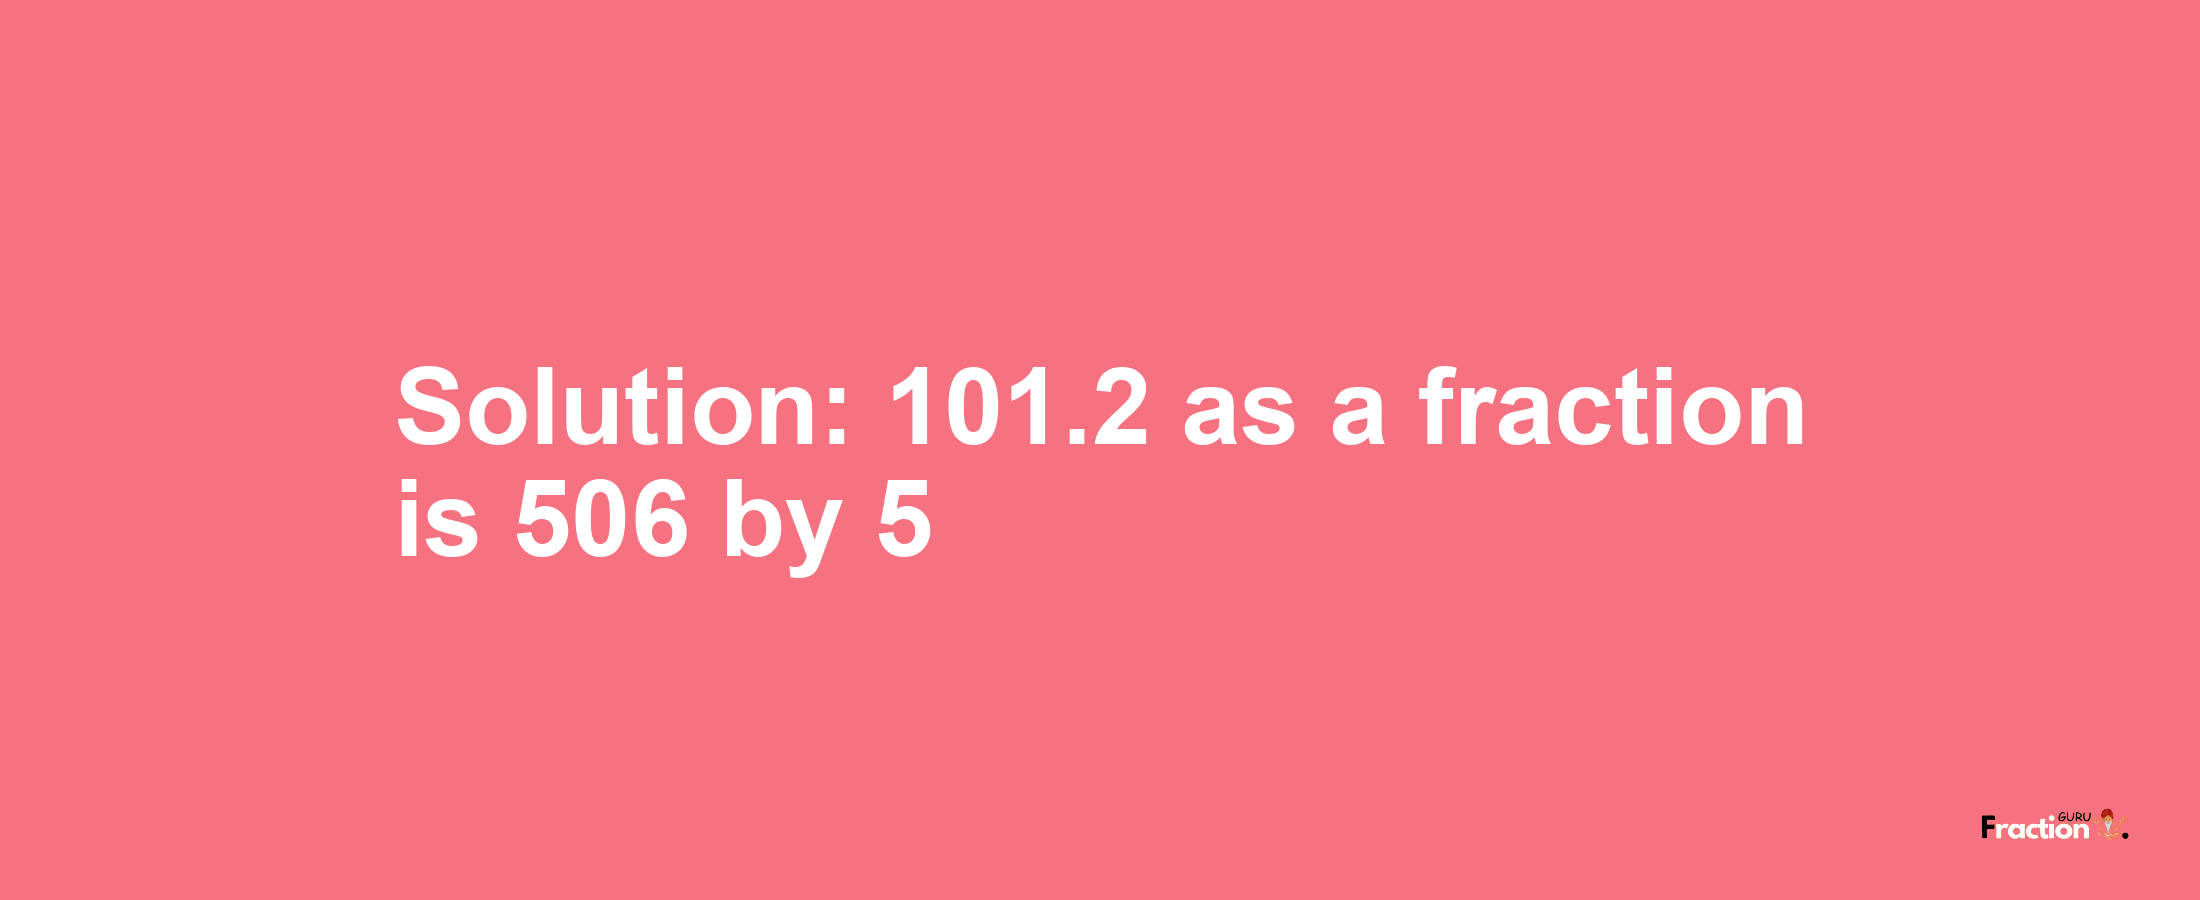 Solution:101.2 as a fraction is 506/5